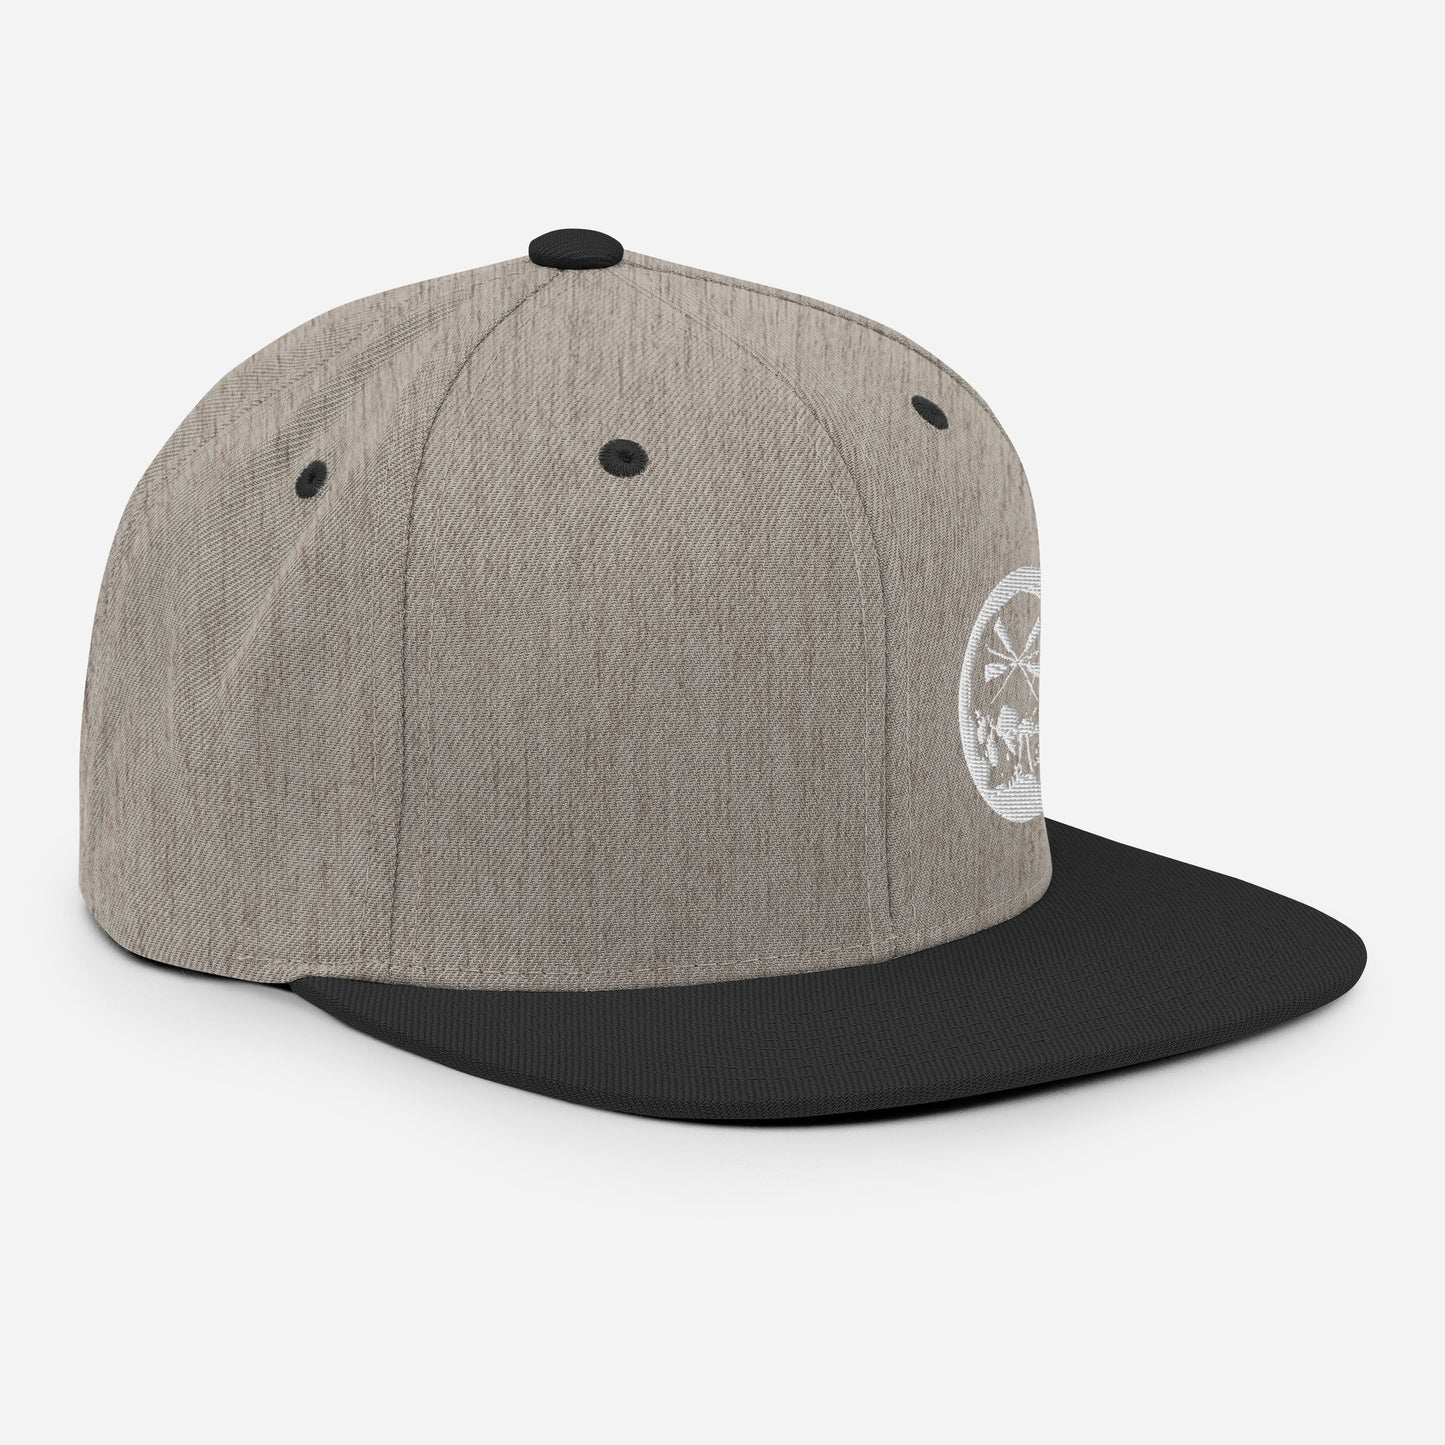 Casquette Snapback Brodé The Needles Factory logo Free Shipping